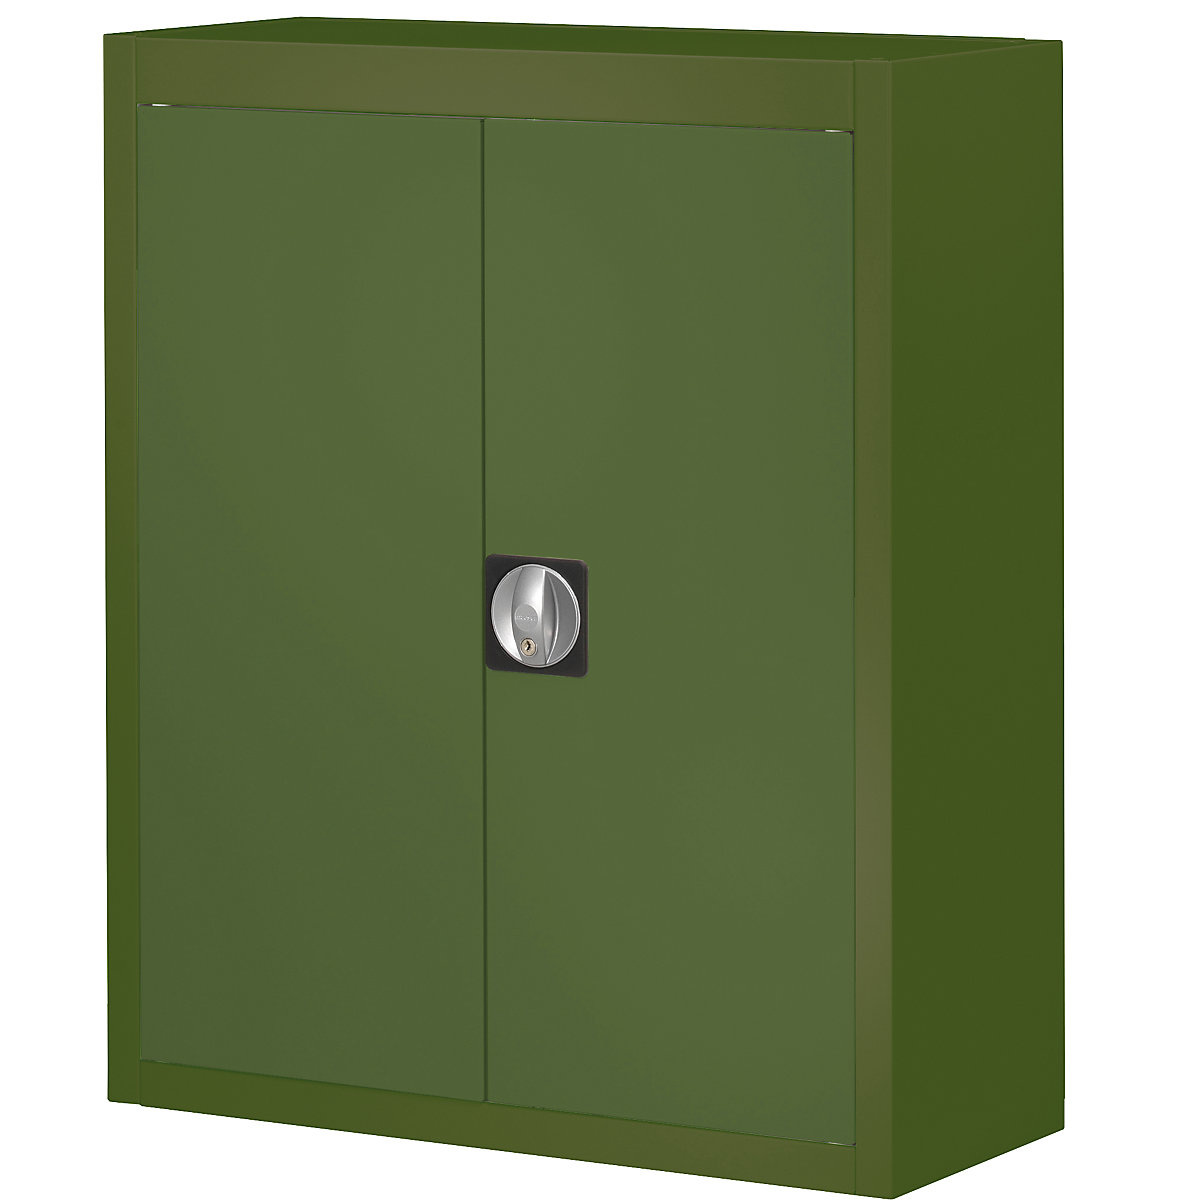 Storage cupboard, without open fronted storage bins – mauser, HxWxD 820 x 680 x 280 mm, single colour, green-5